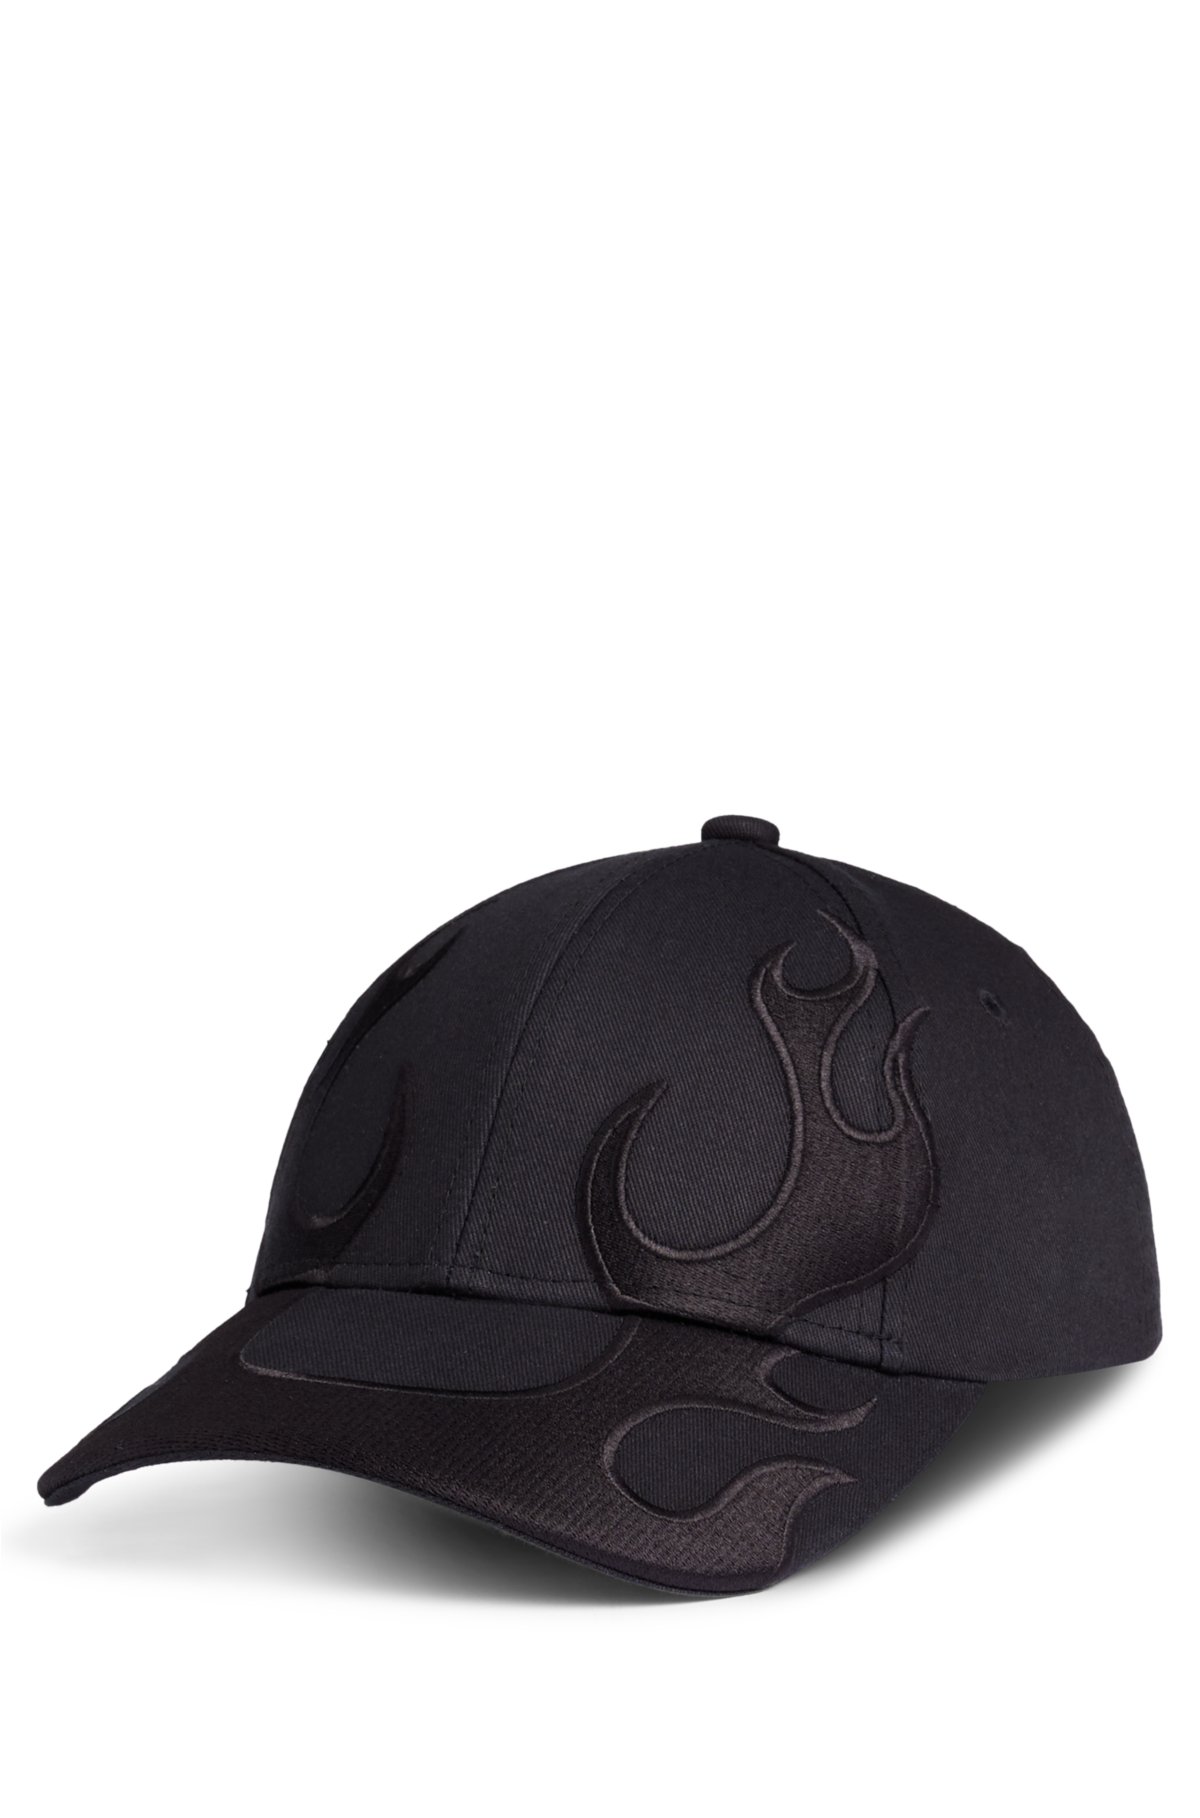 HUGO - Flame-embroidered cap in cotton twill